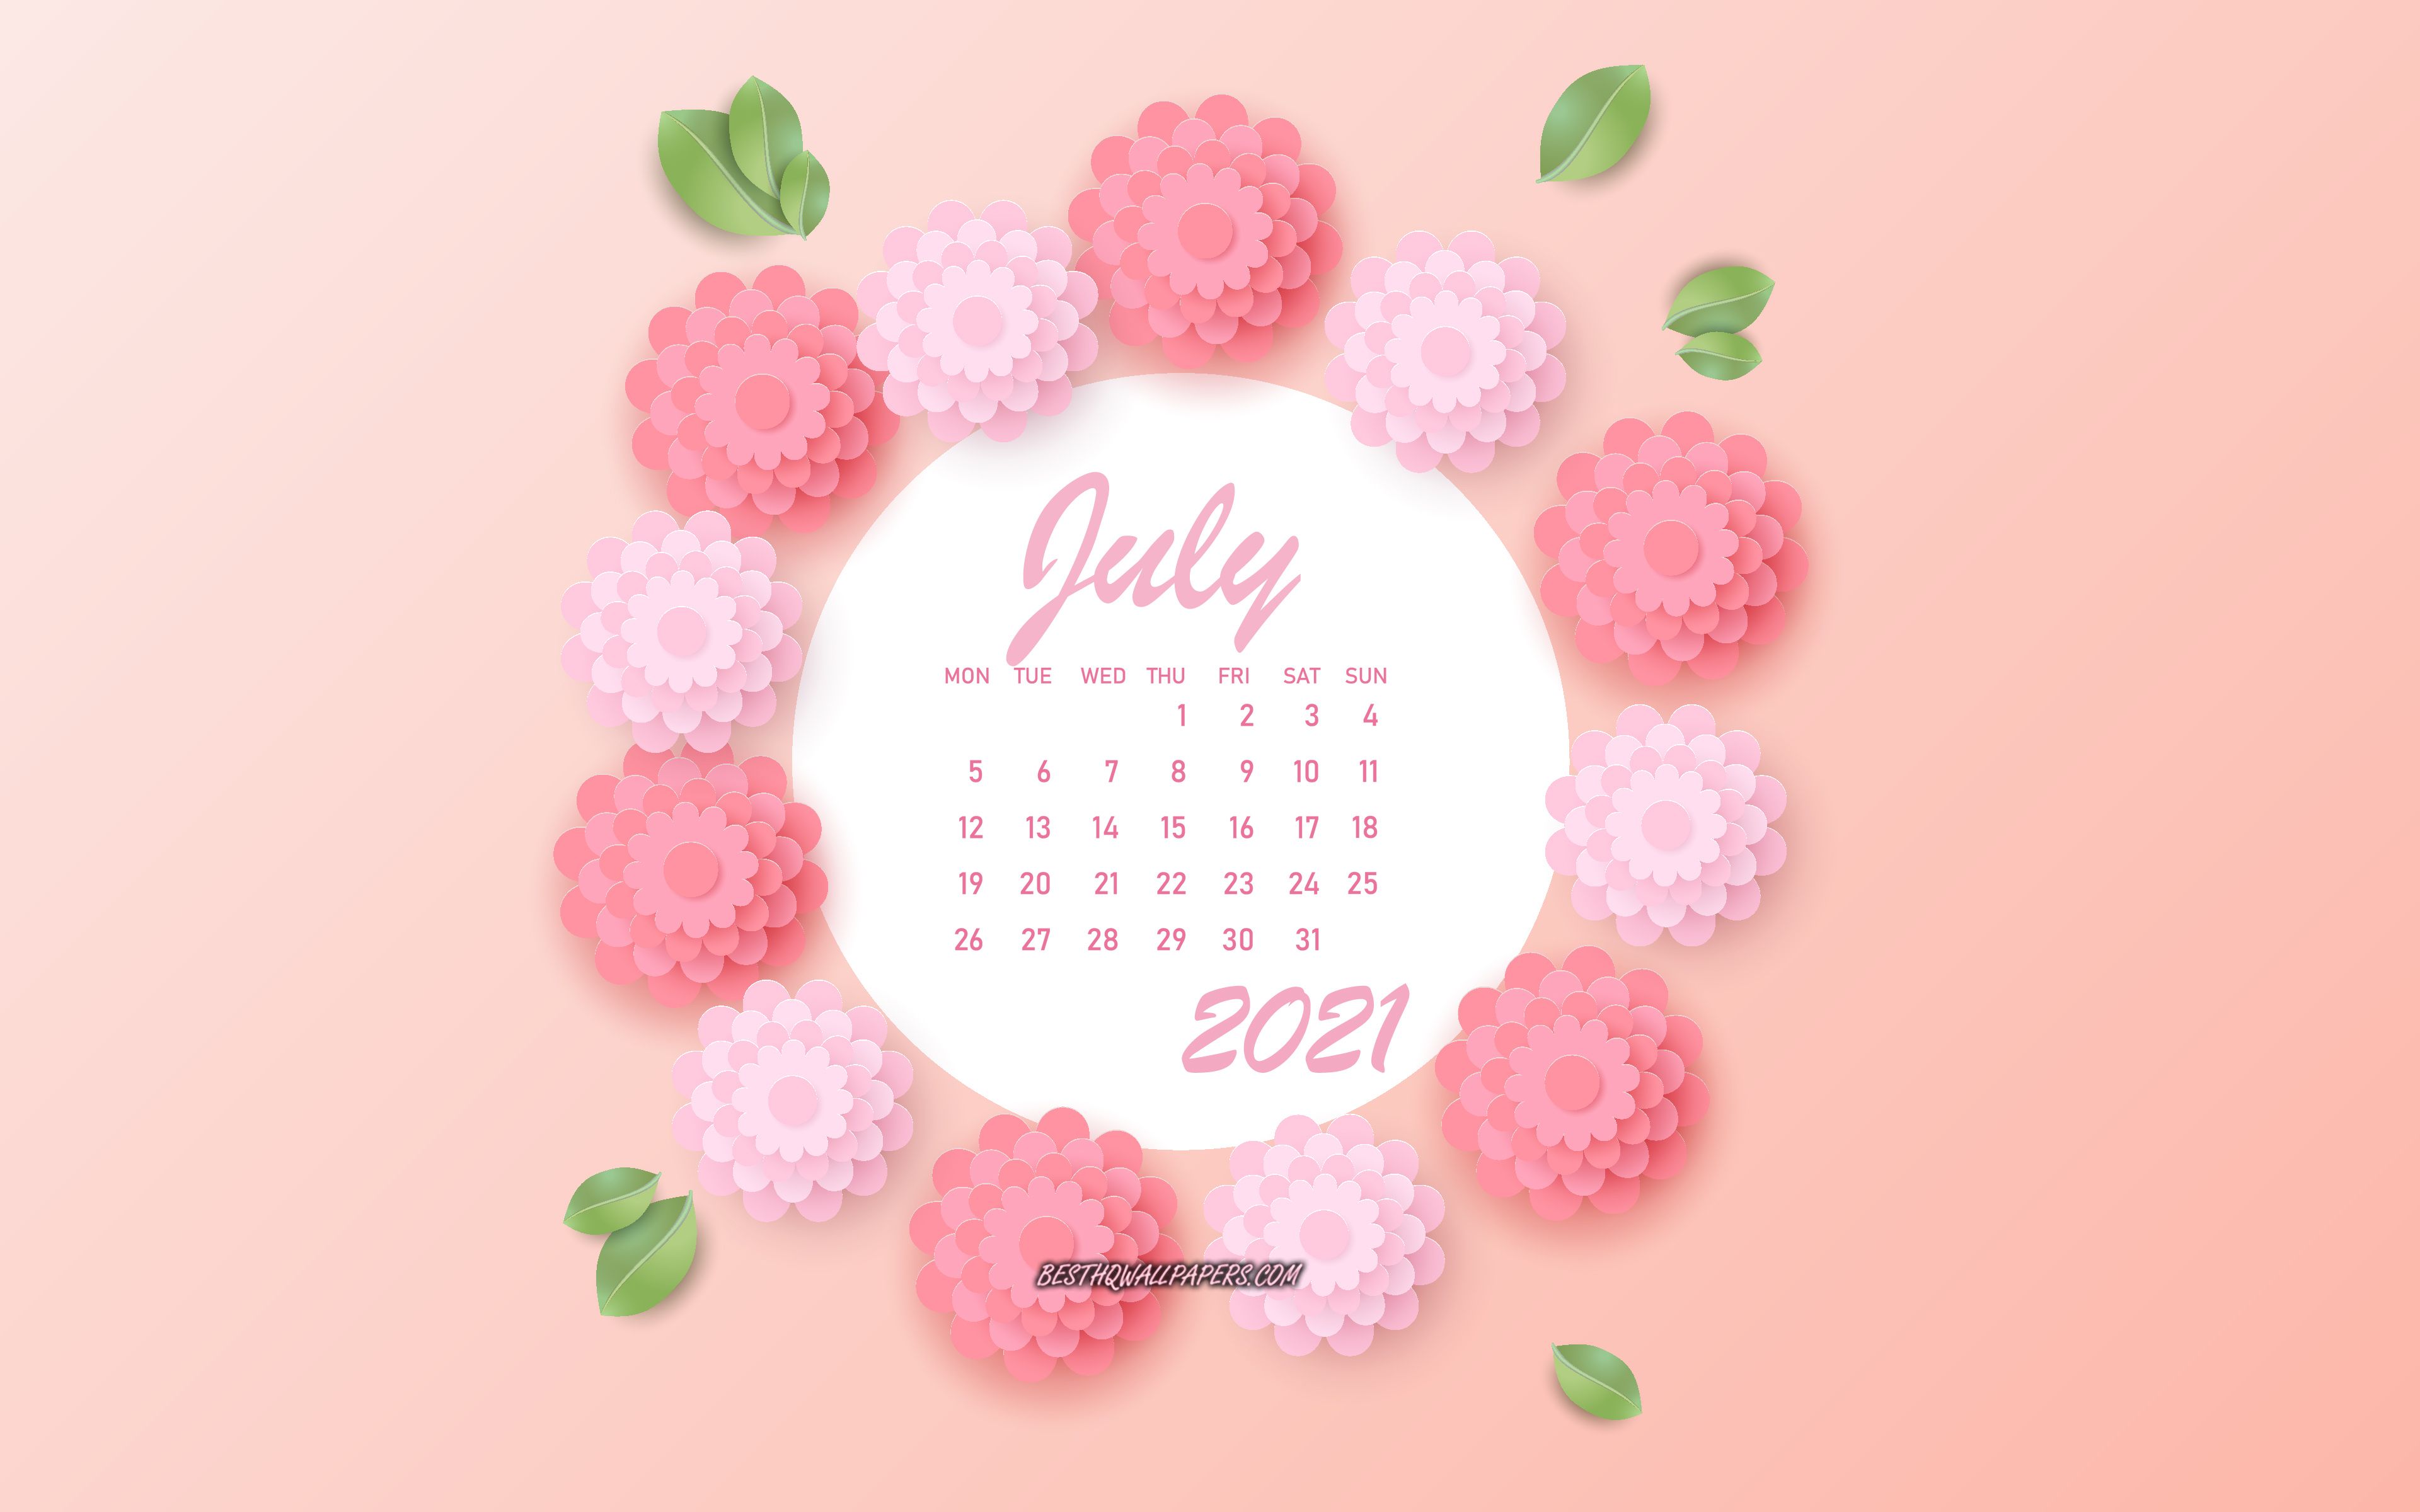 Download wallpaper July 2021 Calendar, pink flowers, July, 2021 summer calendars, 3D paper pink flowers, 2021 July Calendar for desktop with resolution 3840x2400. High Quality HD picture wallpaper